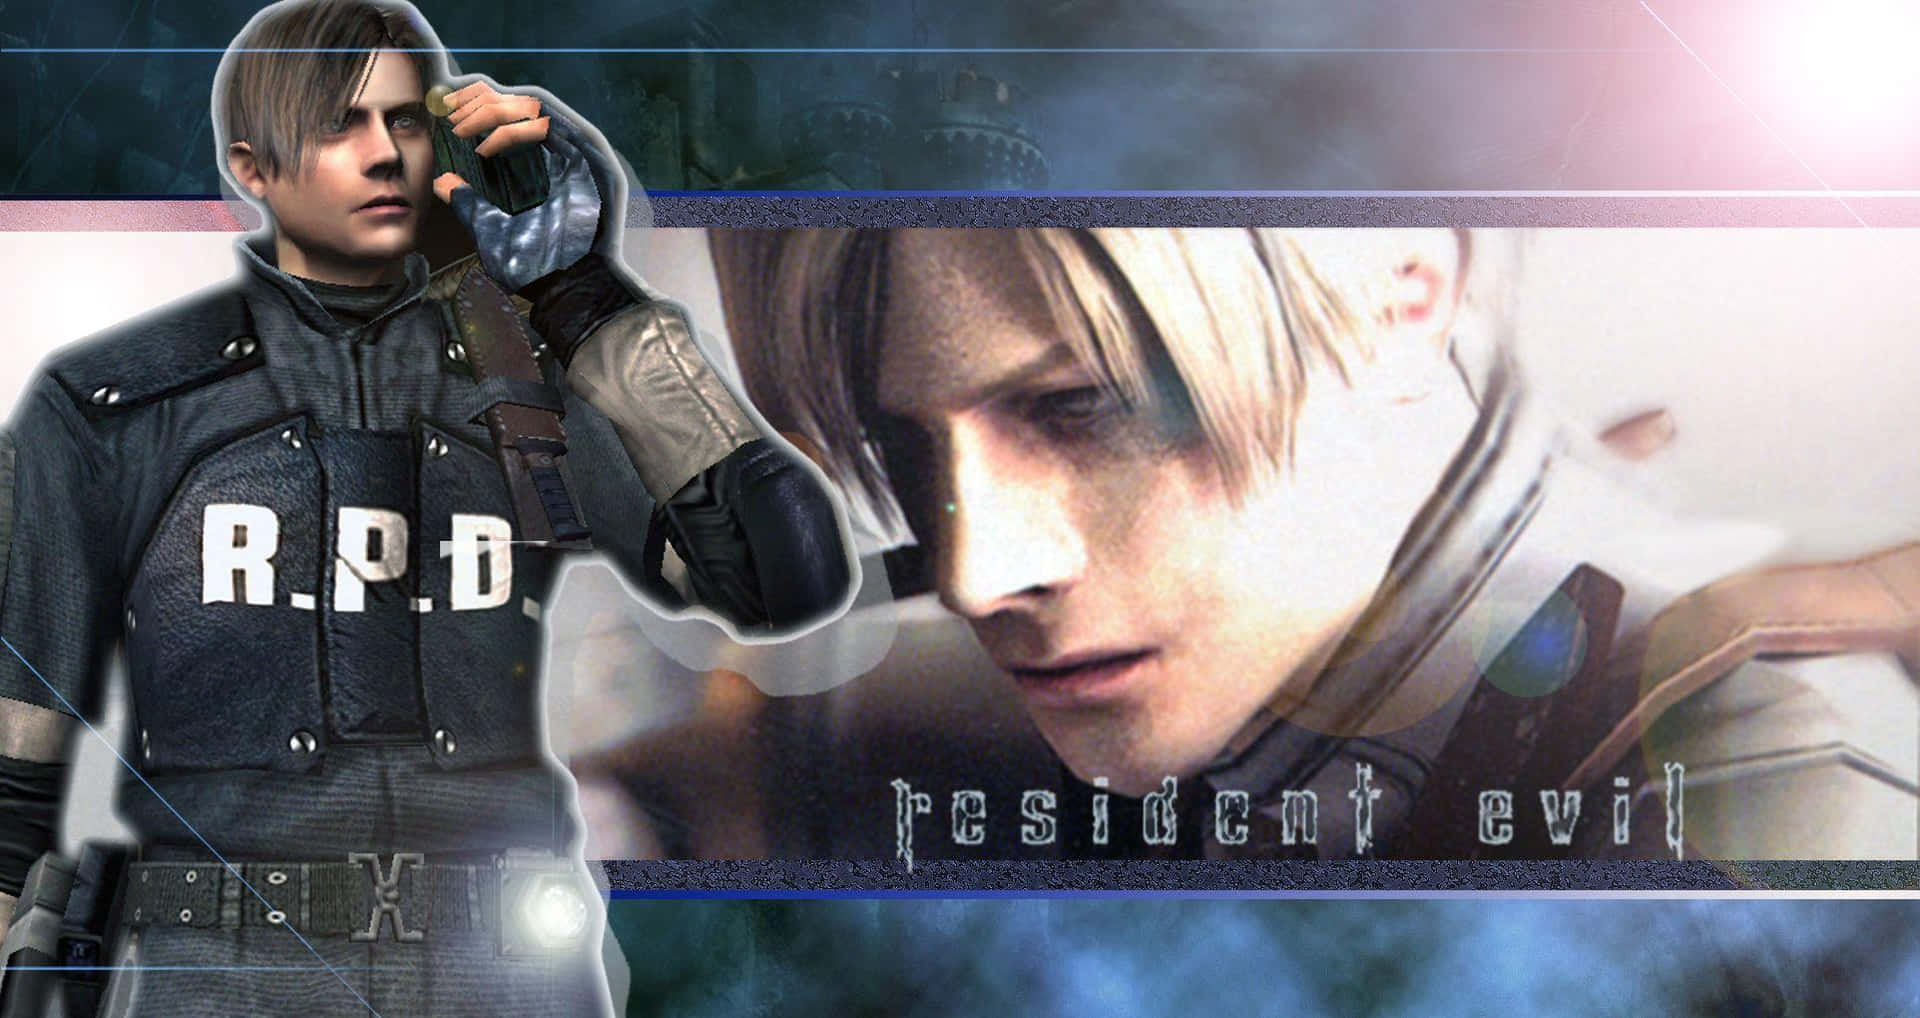 Leon S. Kennedy Showcasing His Combat Skills In Intense Action Wallpaper